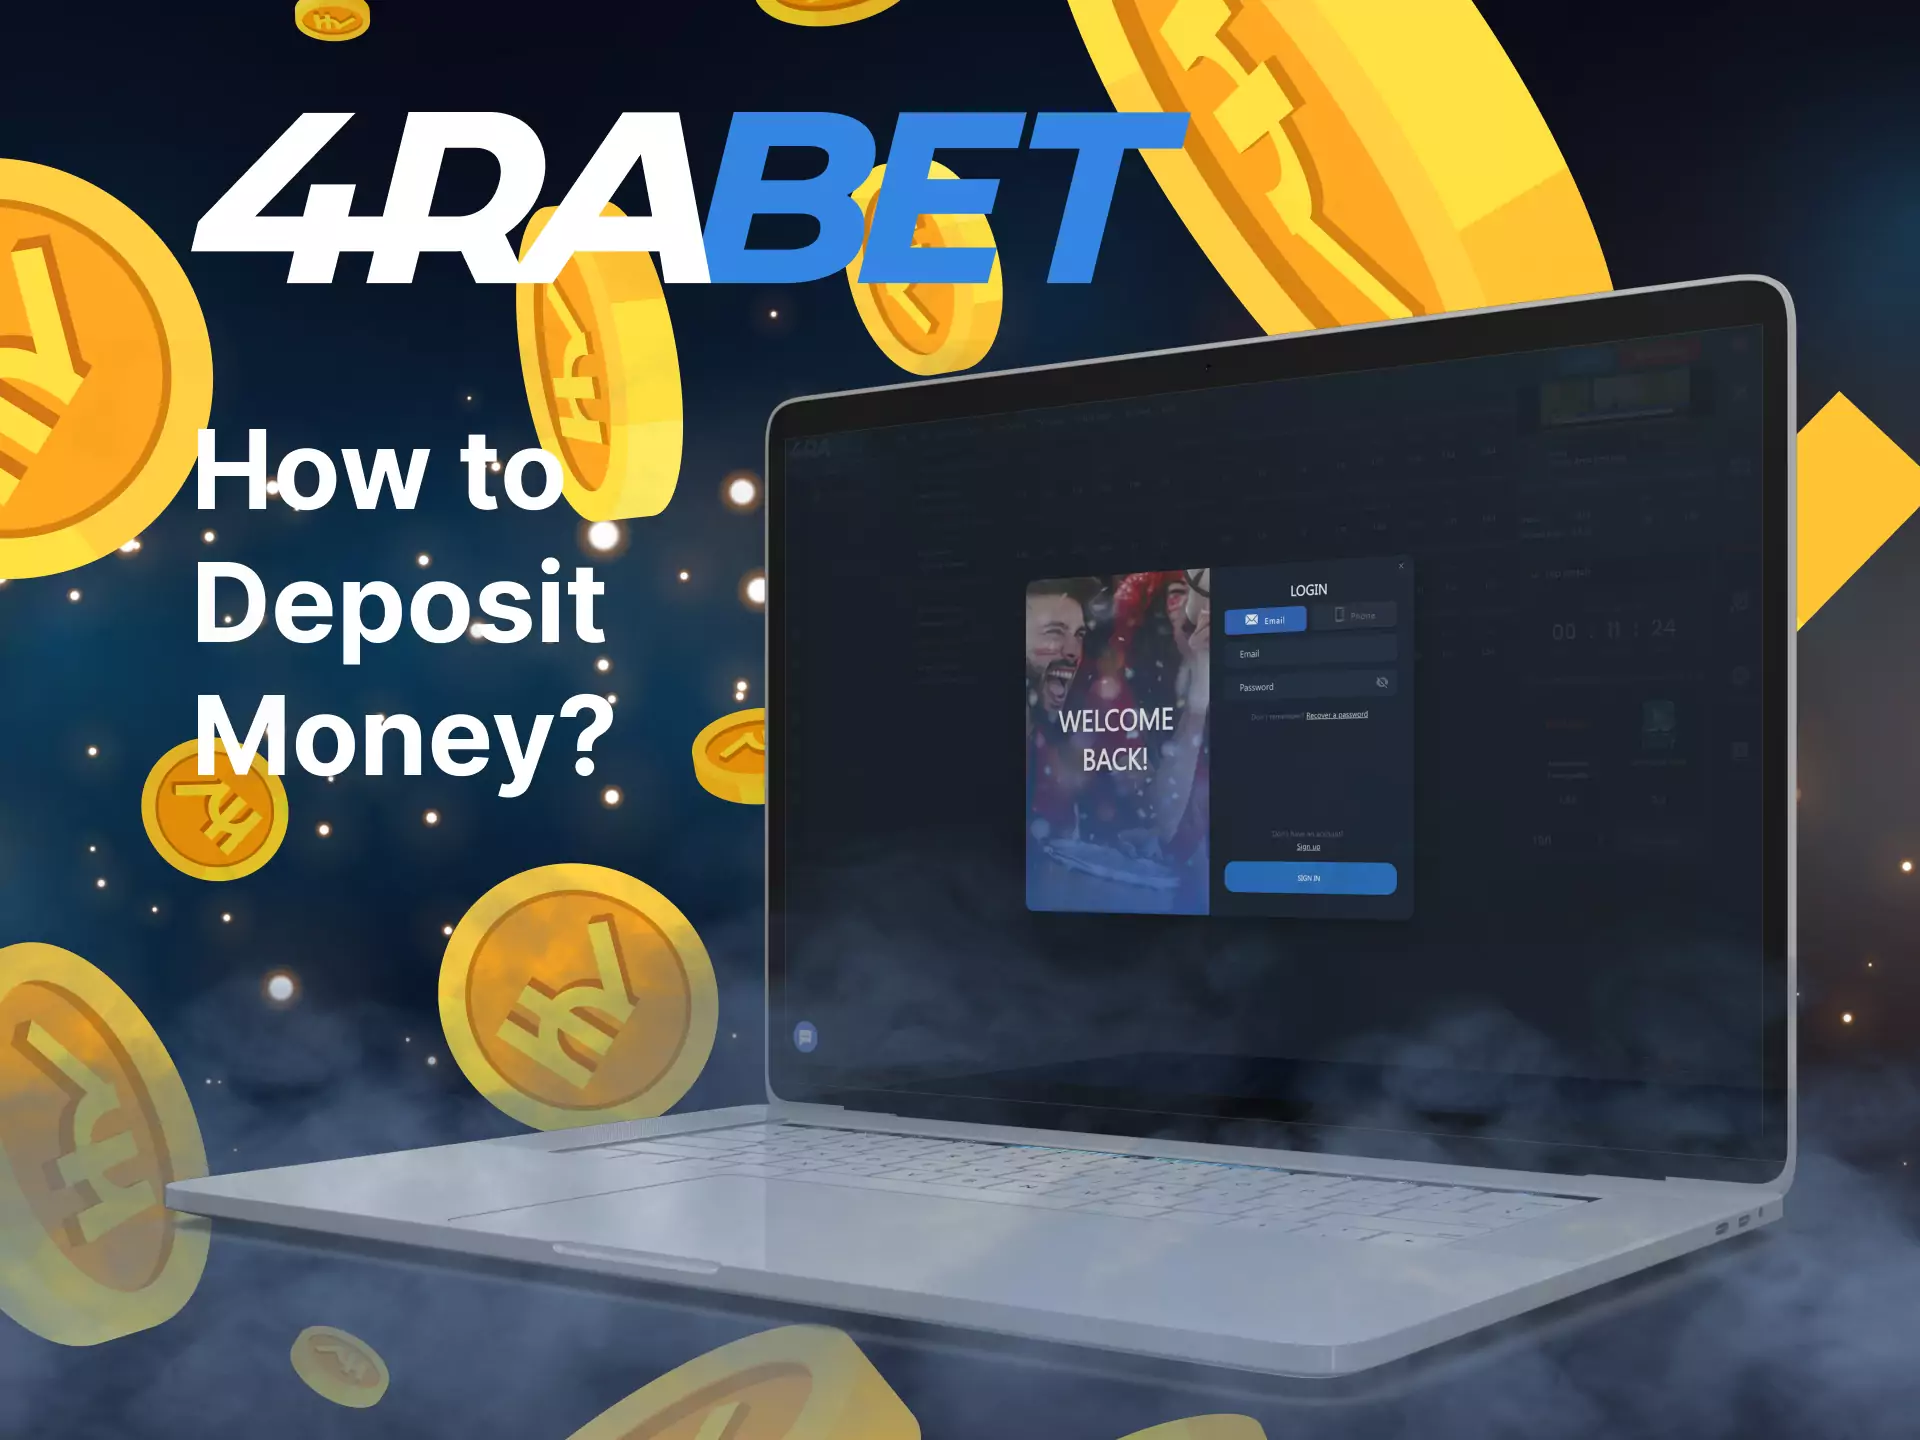 Find out how to top up your 4rabet deposit, this simple instruction will help you.